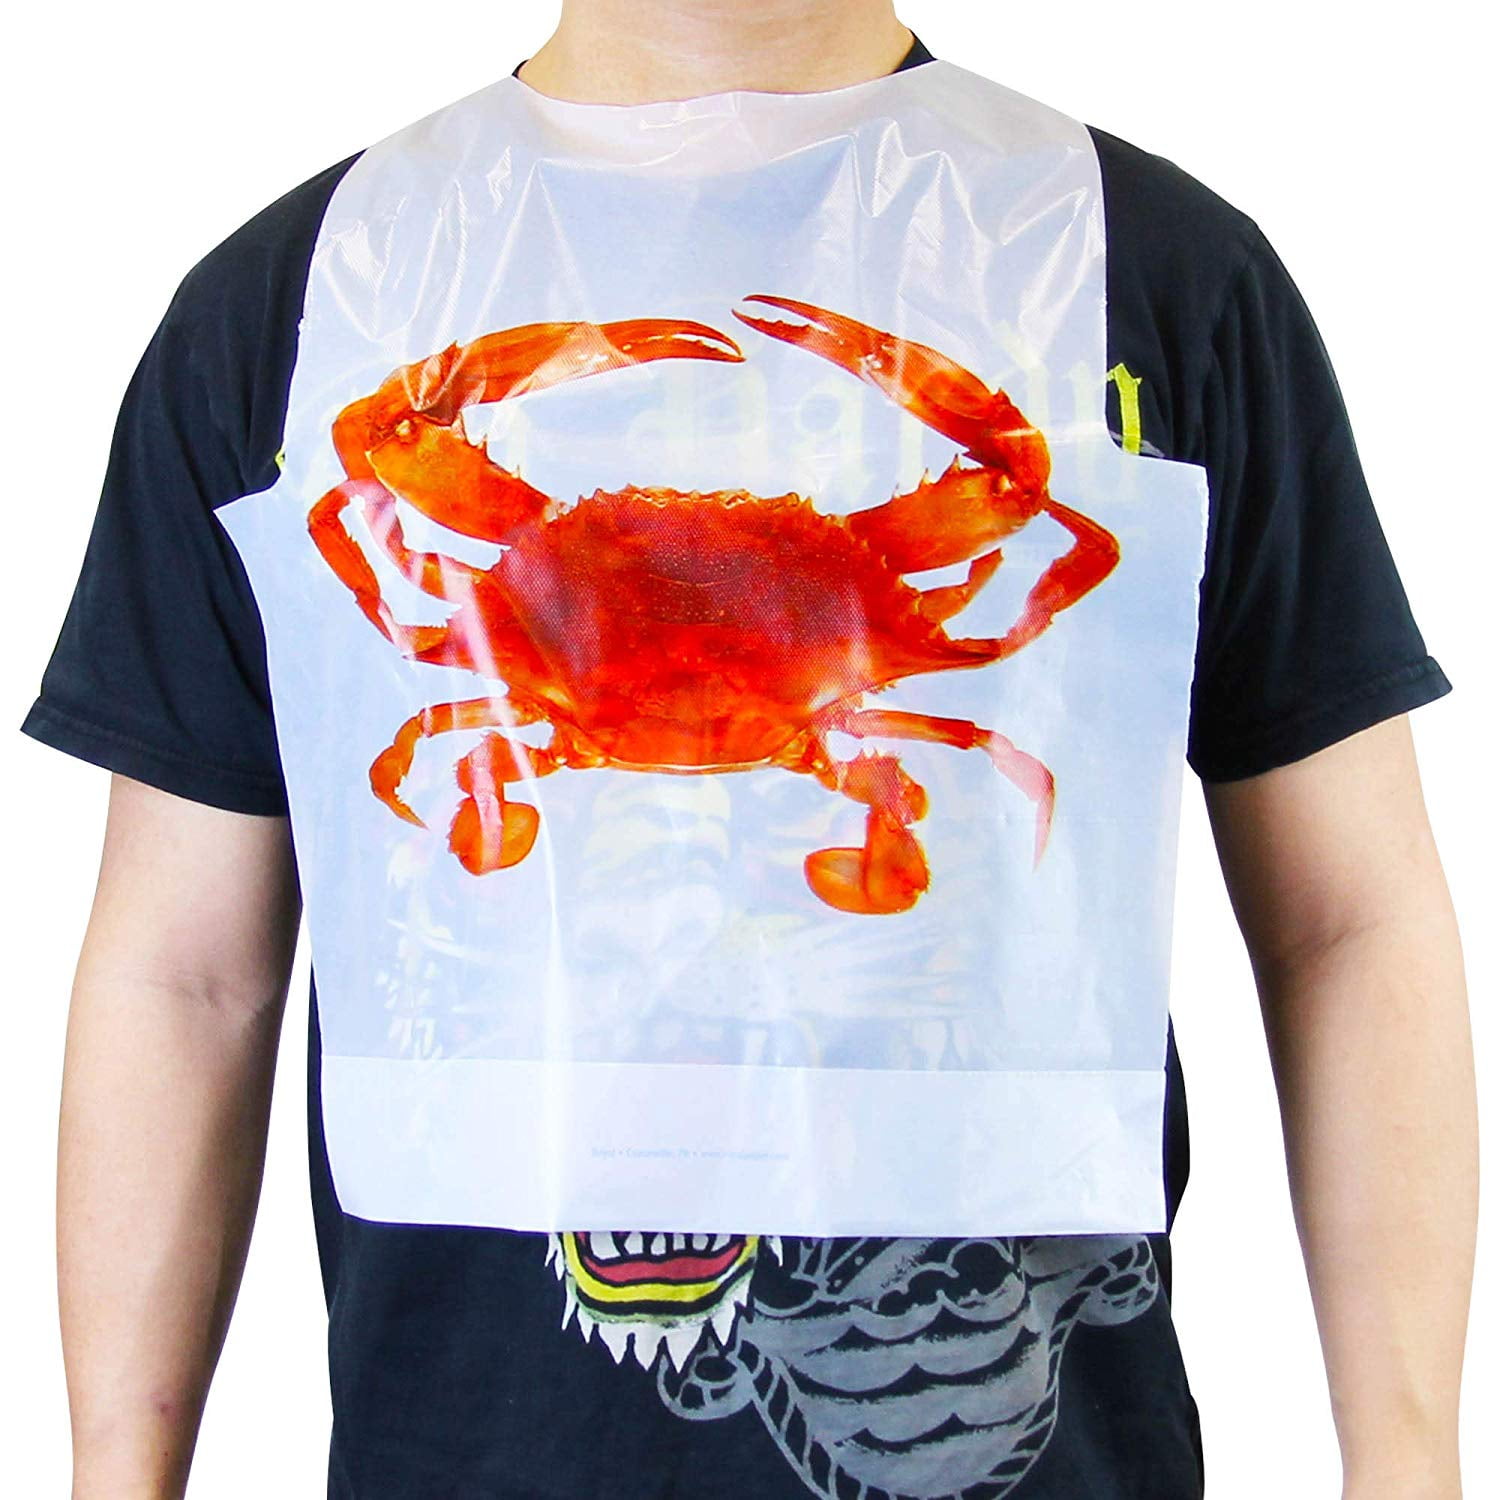 100 PACK OF DISPOSABLE PLASTIC CRAB BIBS FREE SHIPPING 